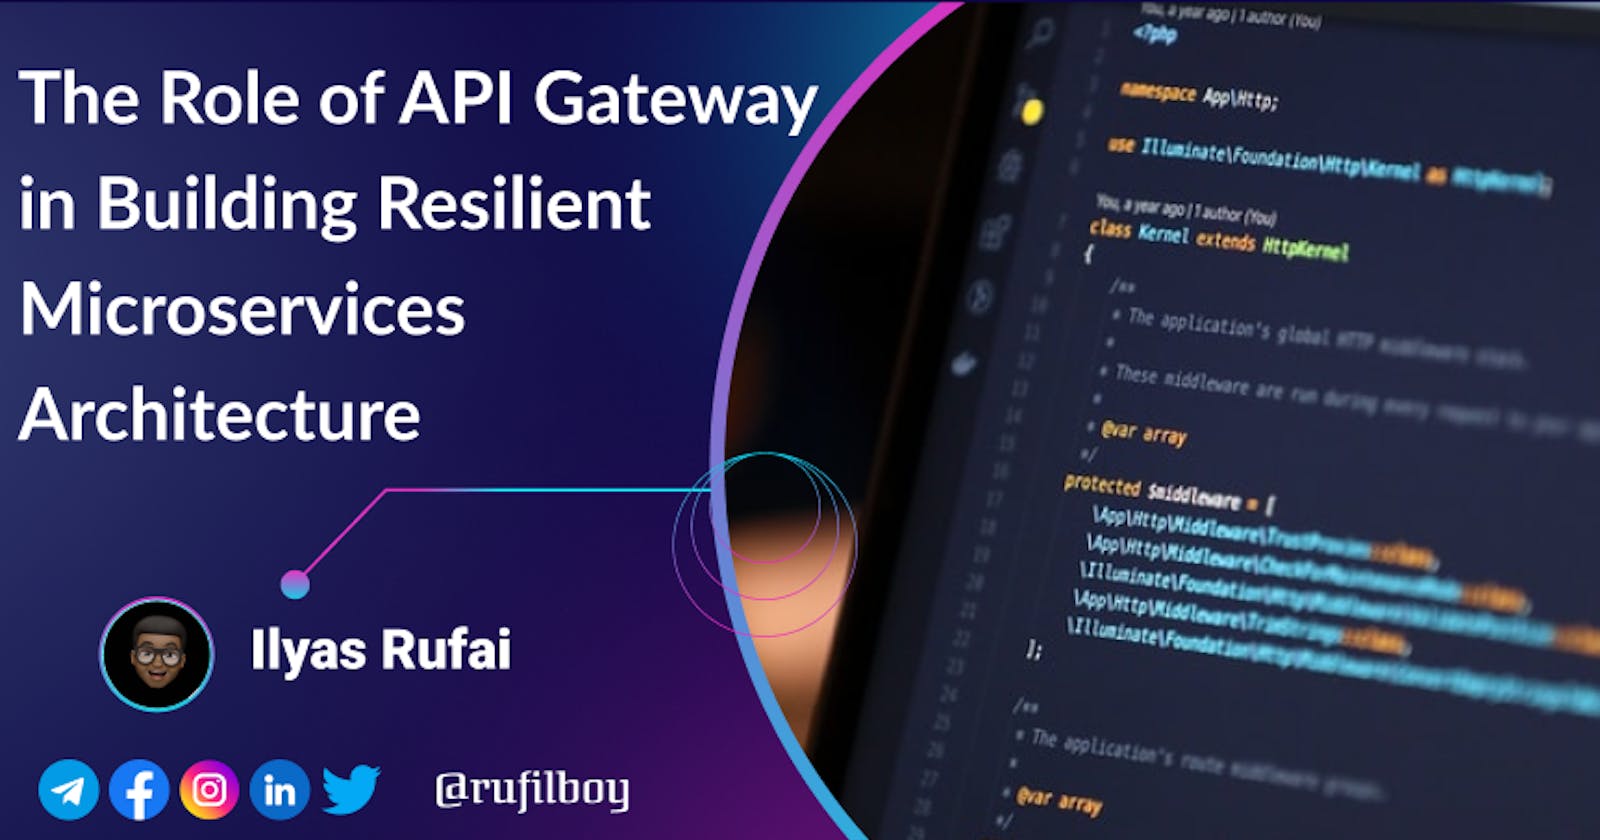 Day 77 -The Role of API Gateway in Building Resilient Microservices Architecture